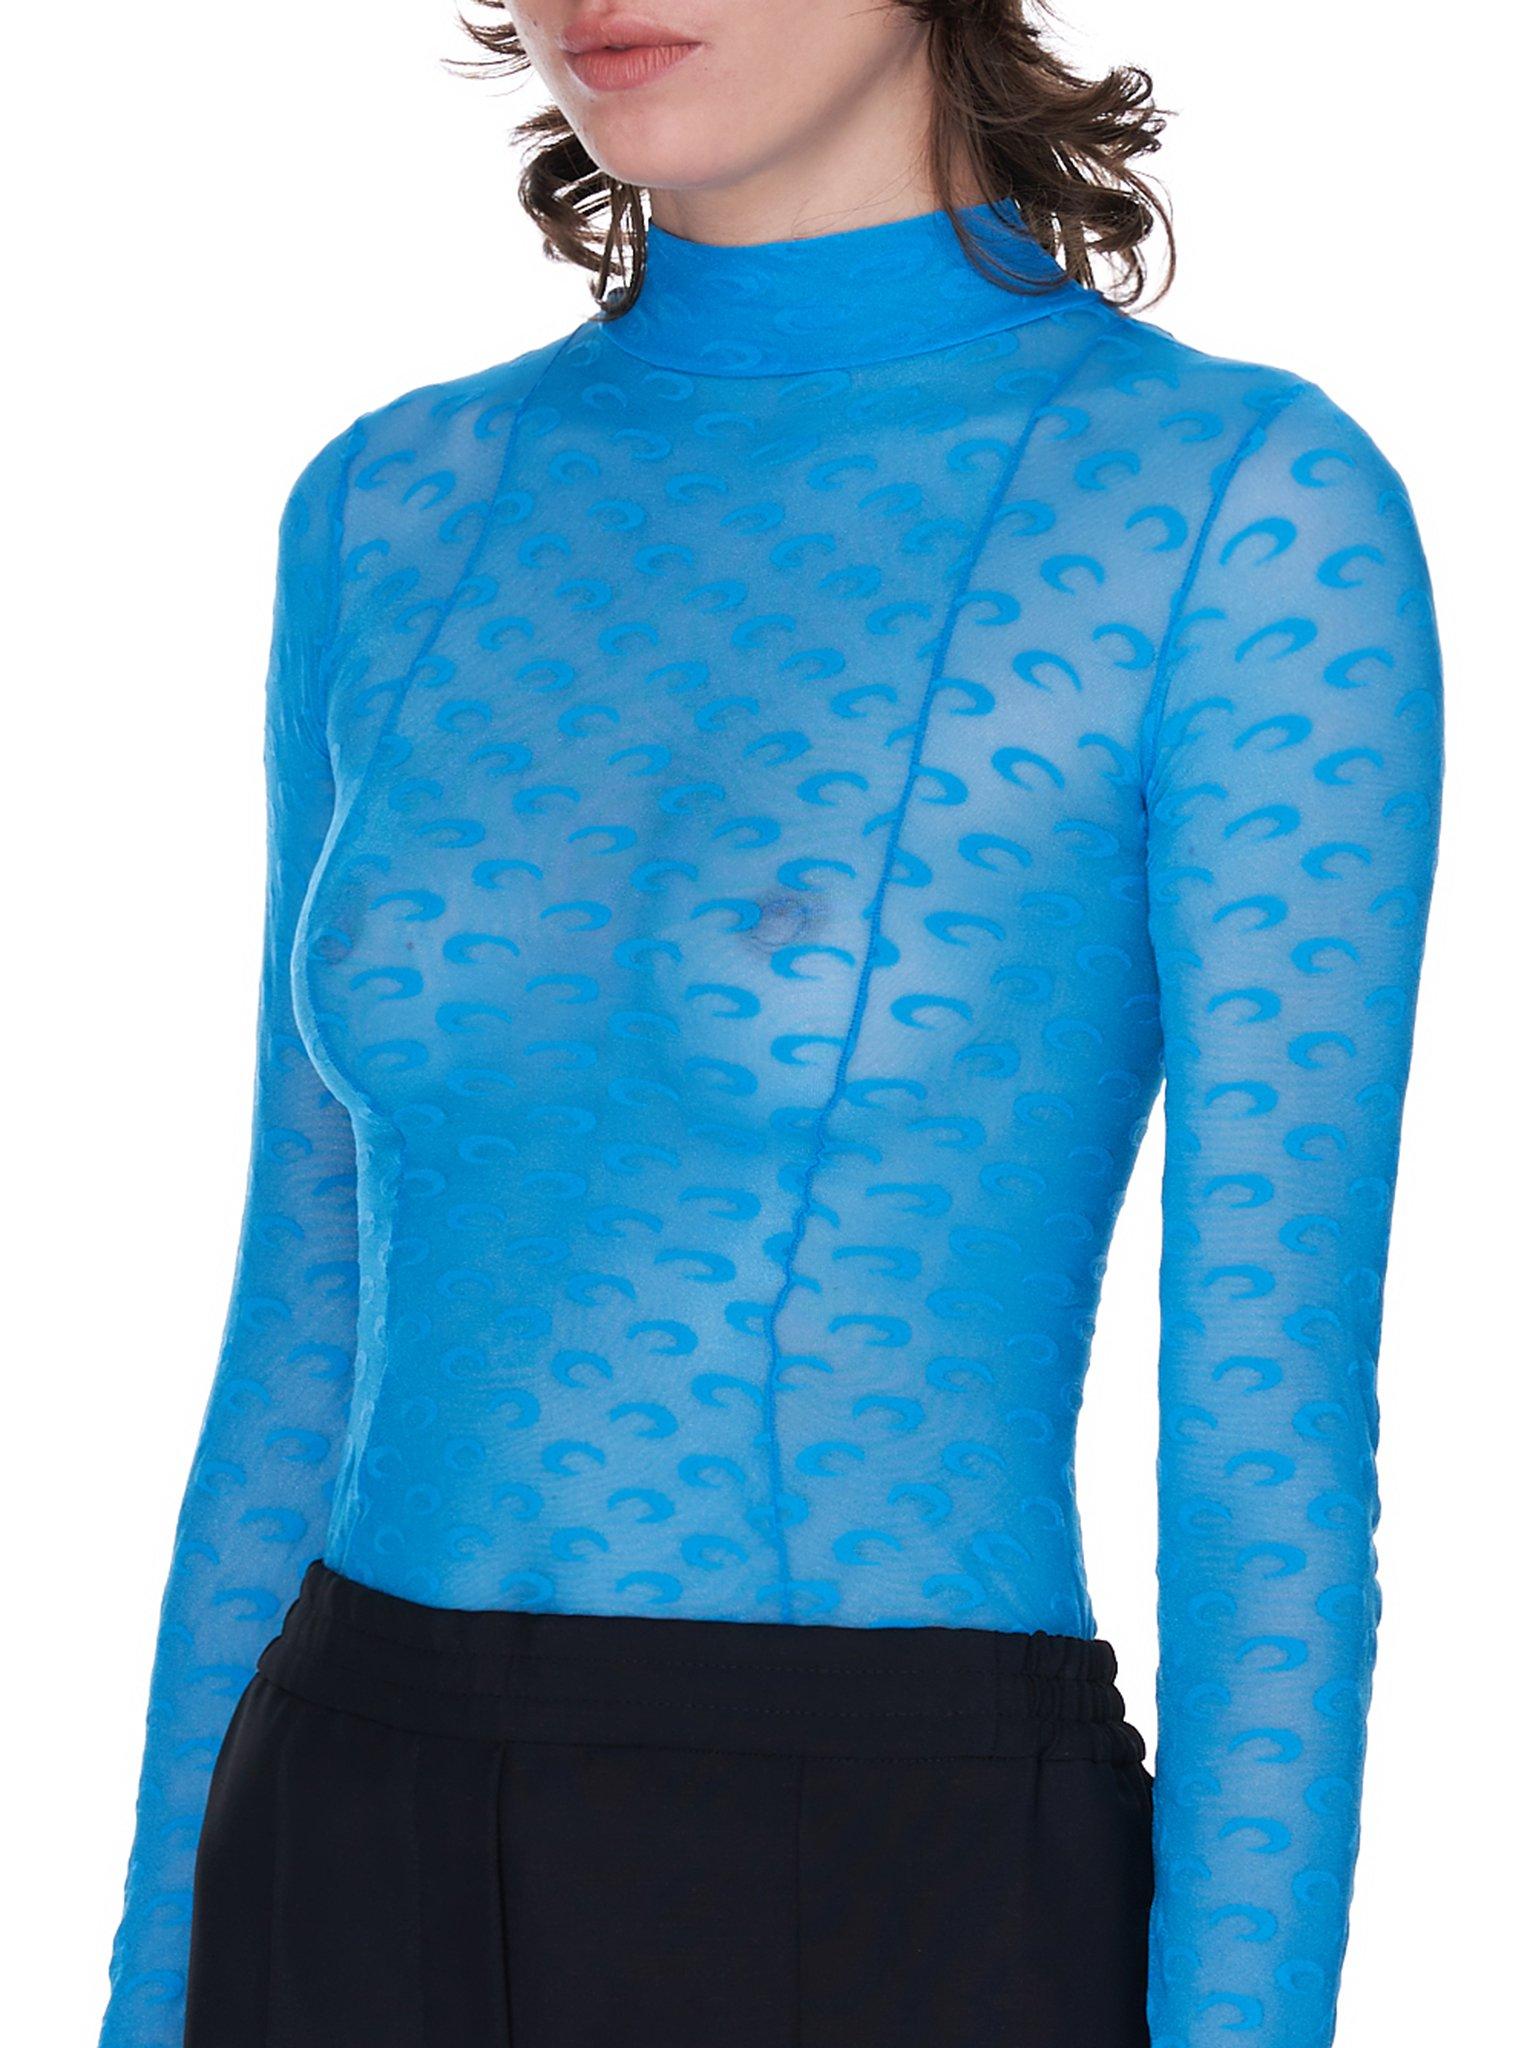 Marine Serre Synthetic Sheer Moon Jacquard Top in Cobalt (Blue) | Lyst